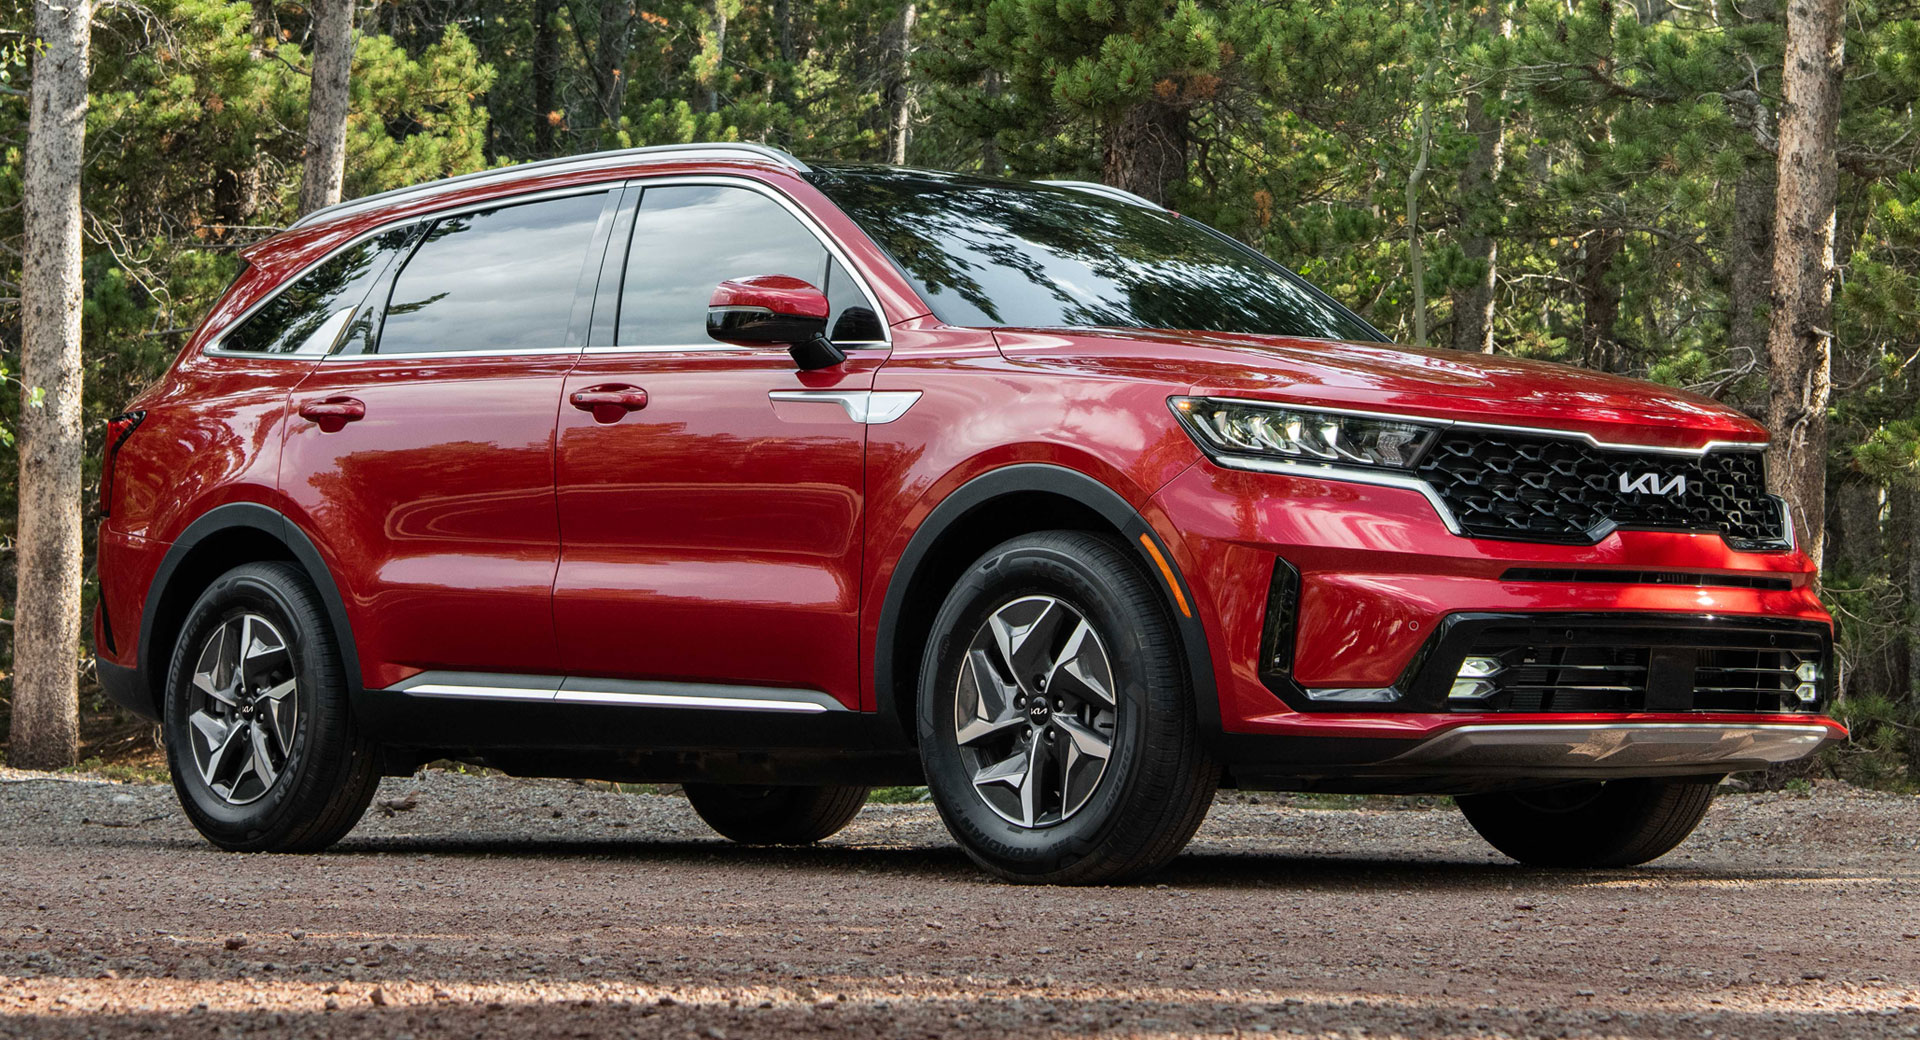 2022 Kia Sorento Receives Upgraded Equipment And A Minor Price Hike | Carscoops